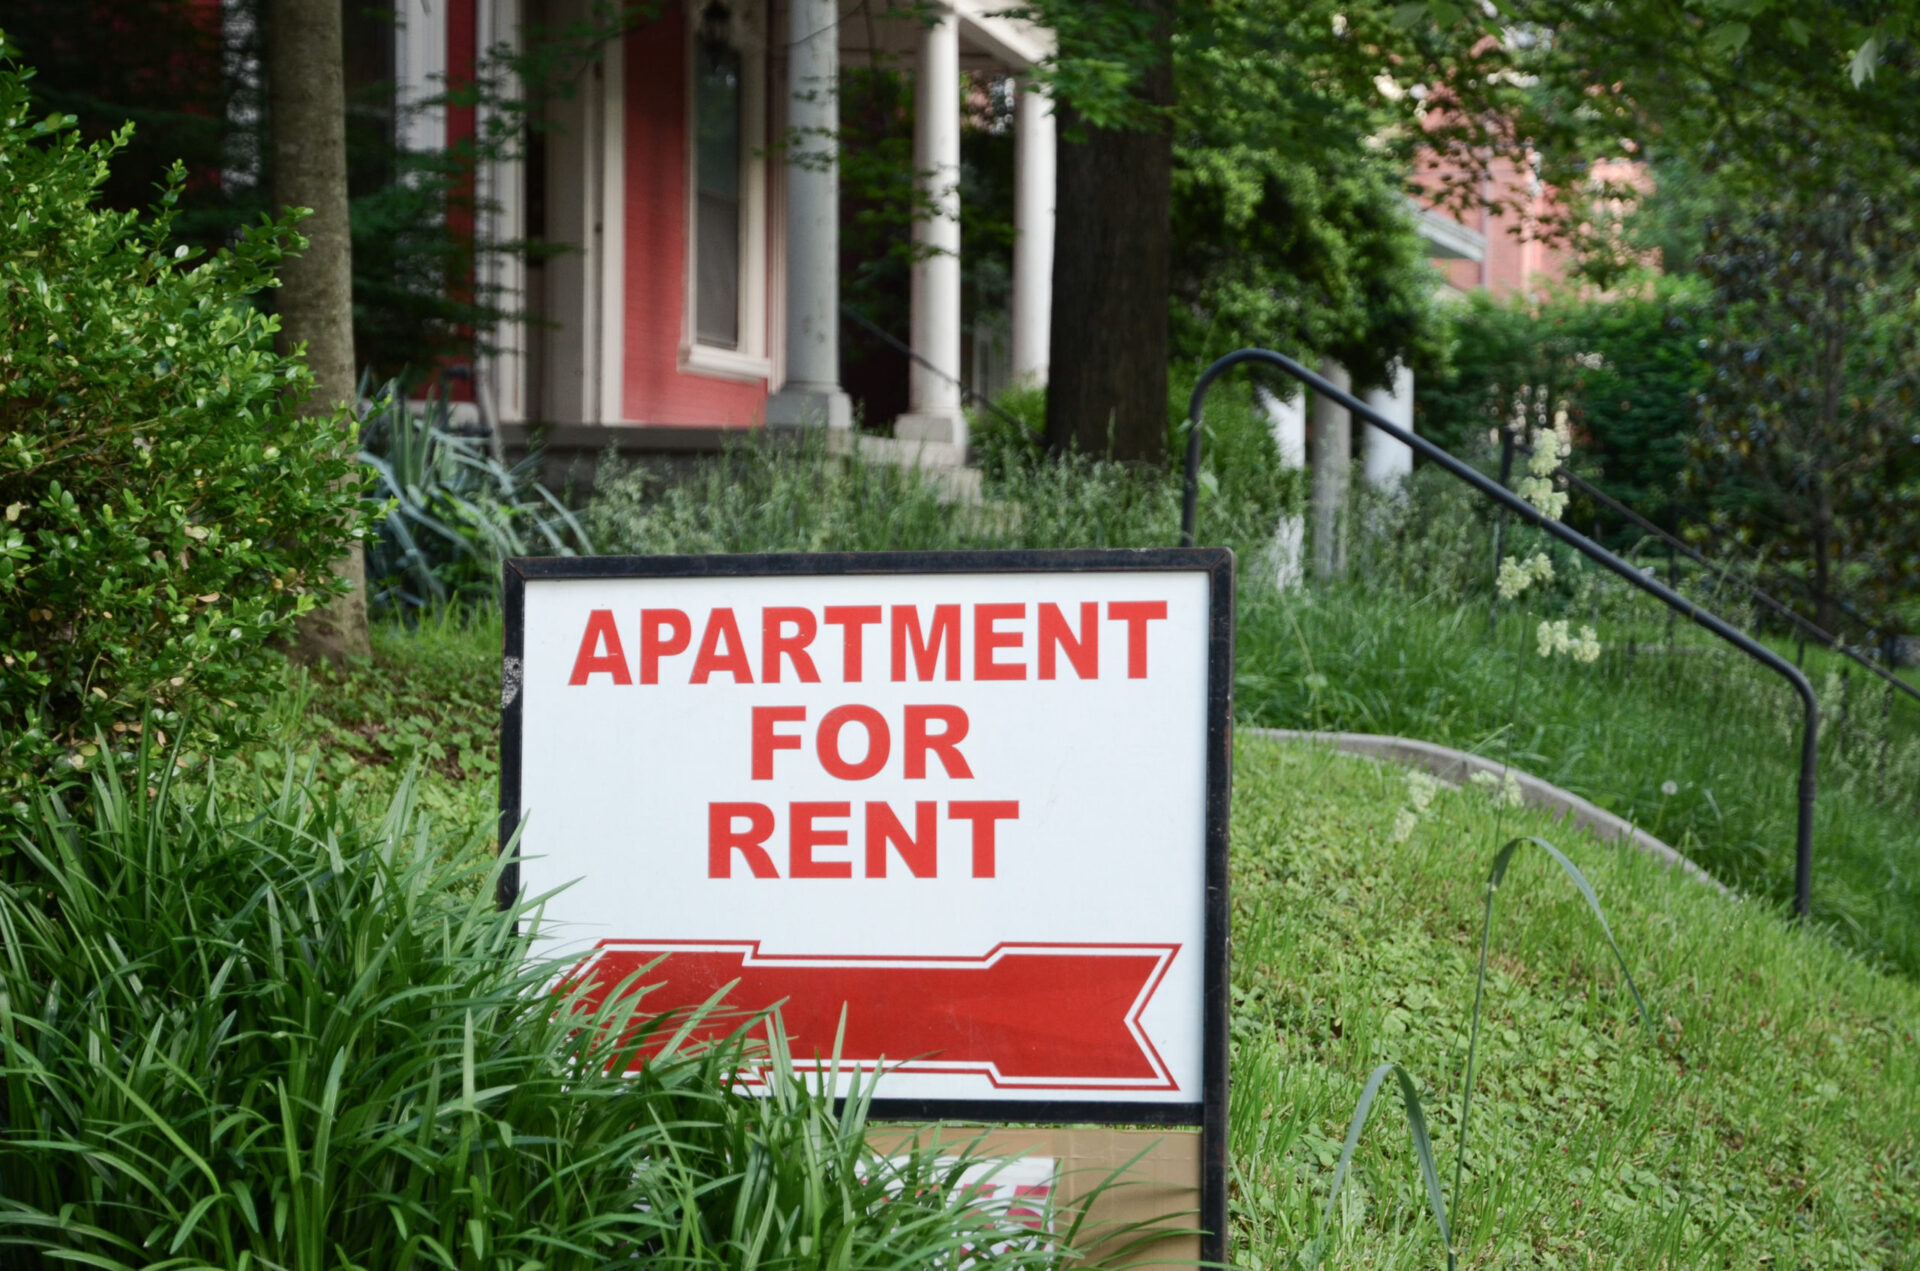 Rent Growth Is Slowing, But Only For Higher-Priced Properties